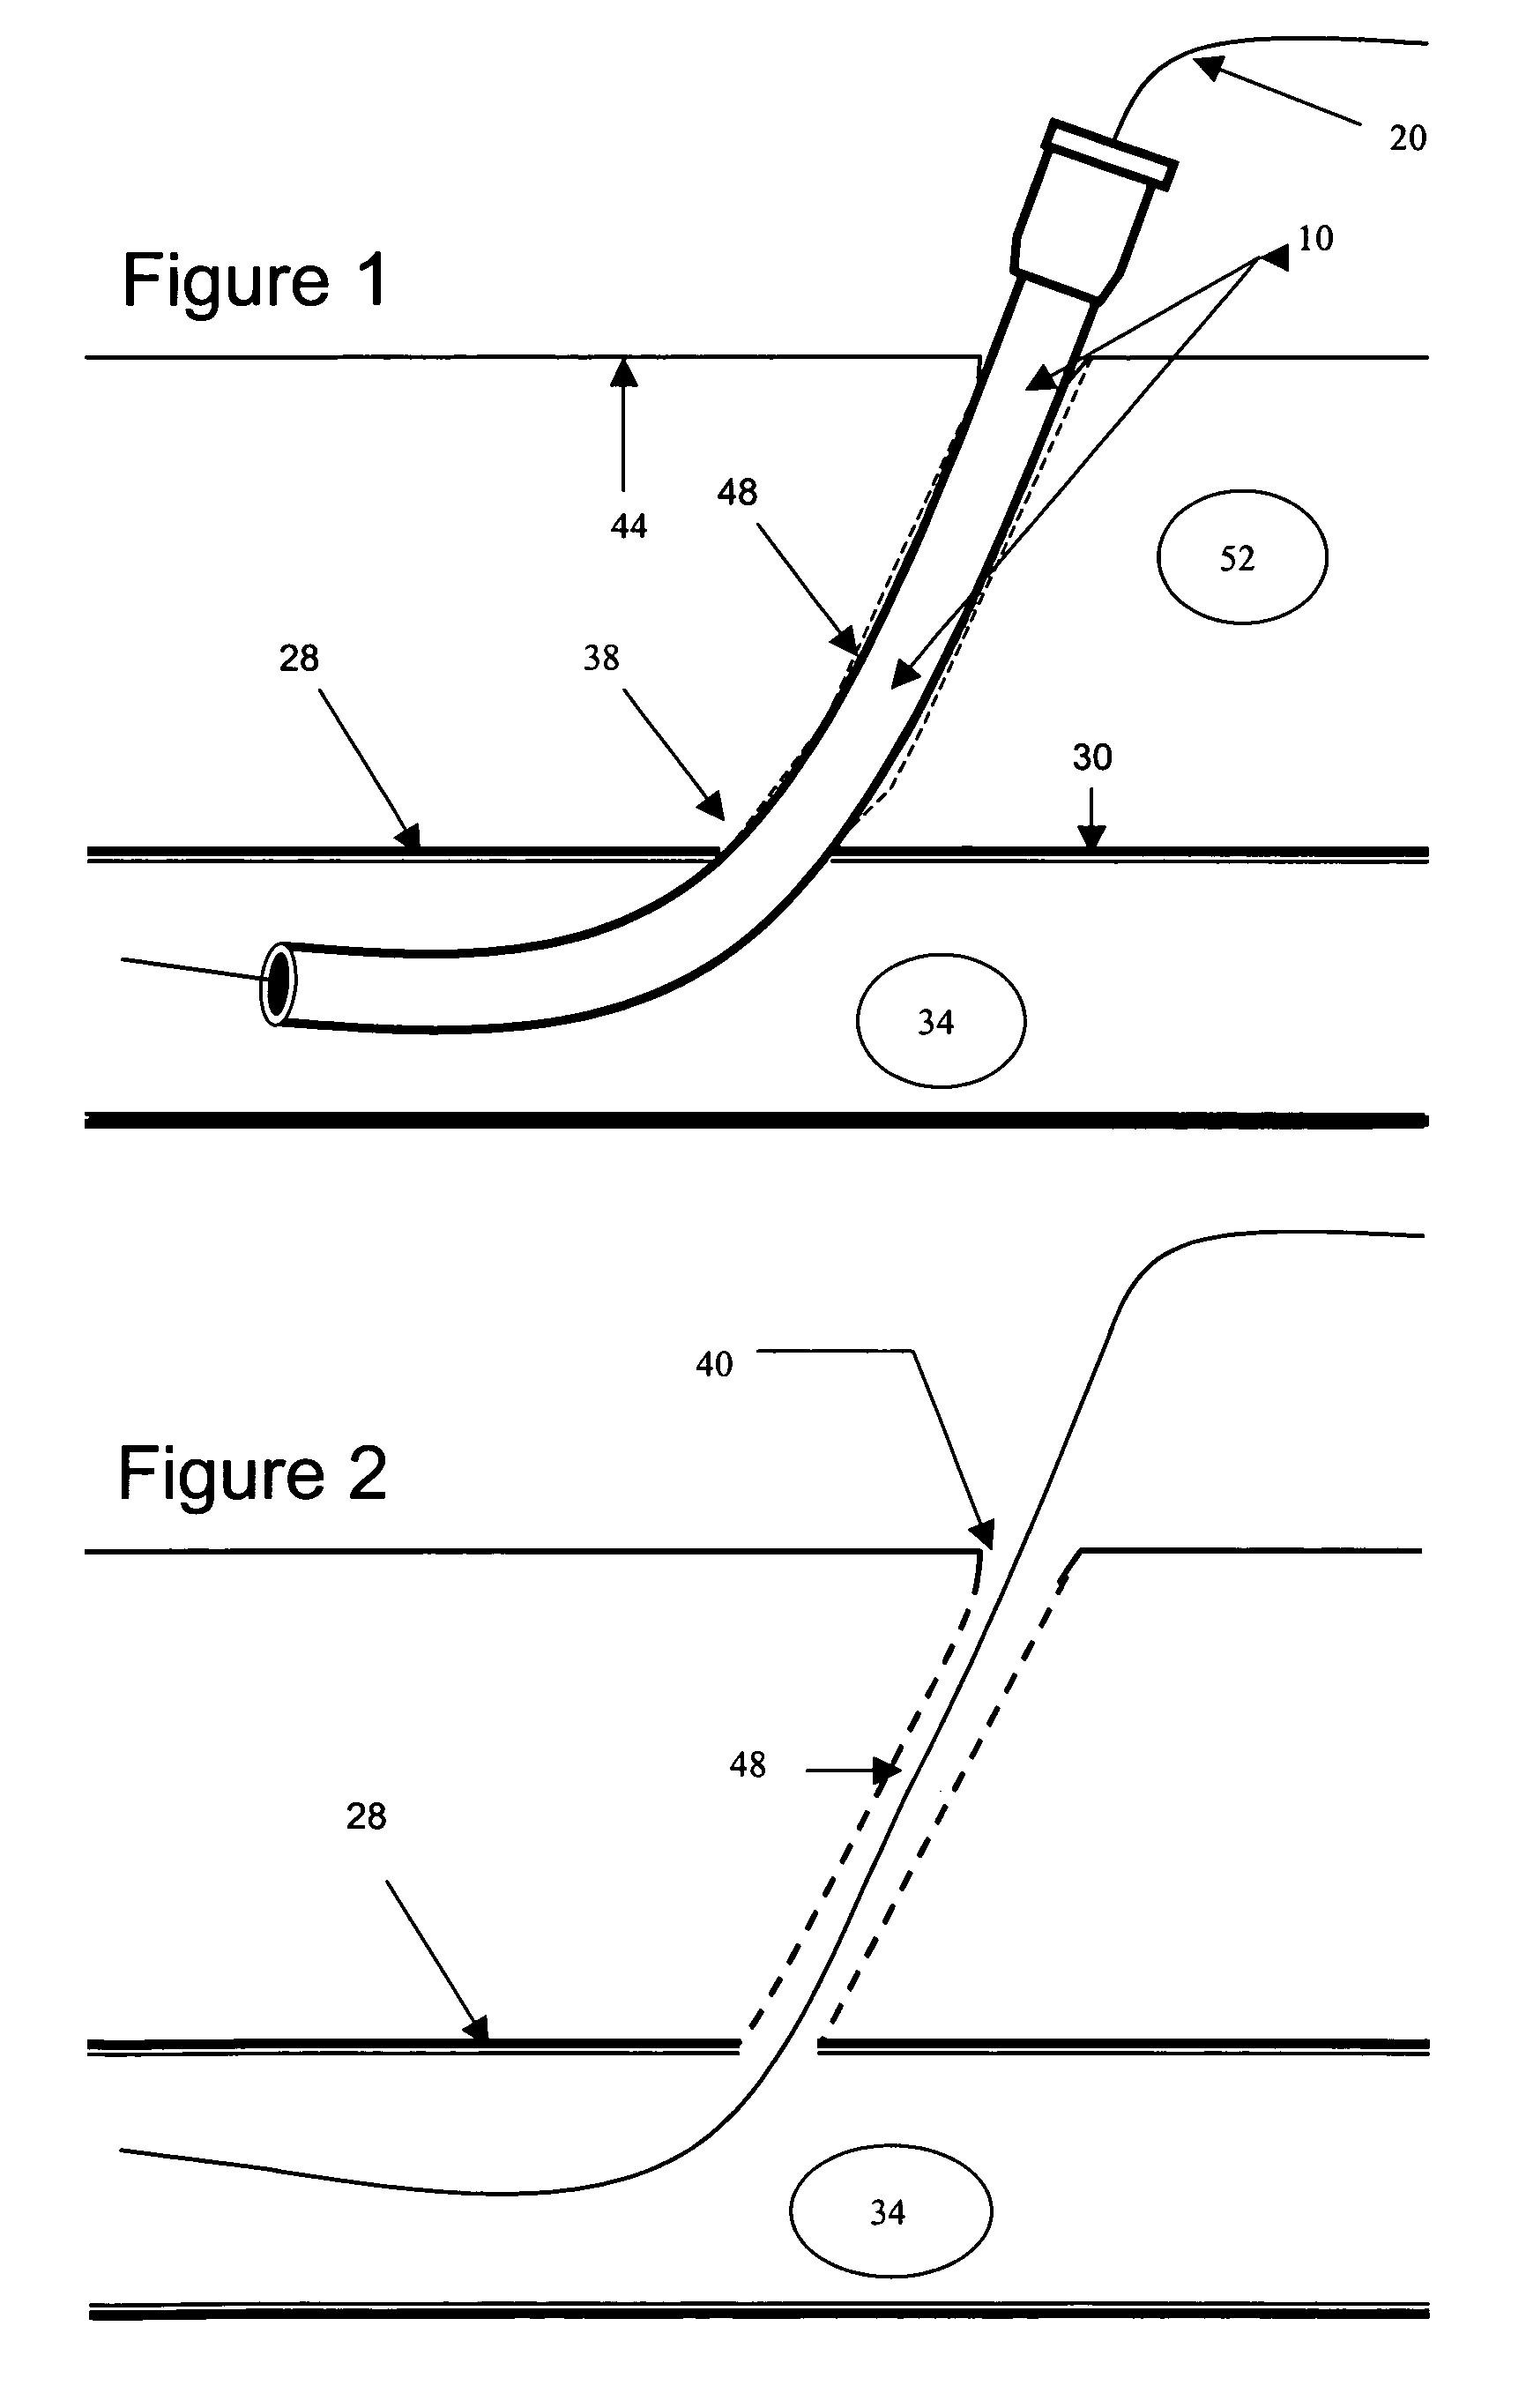 Hemostatic wire guided bandage and method of use